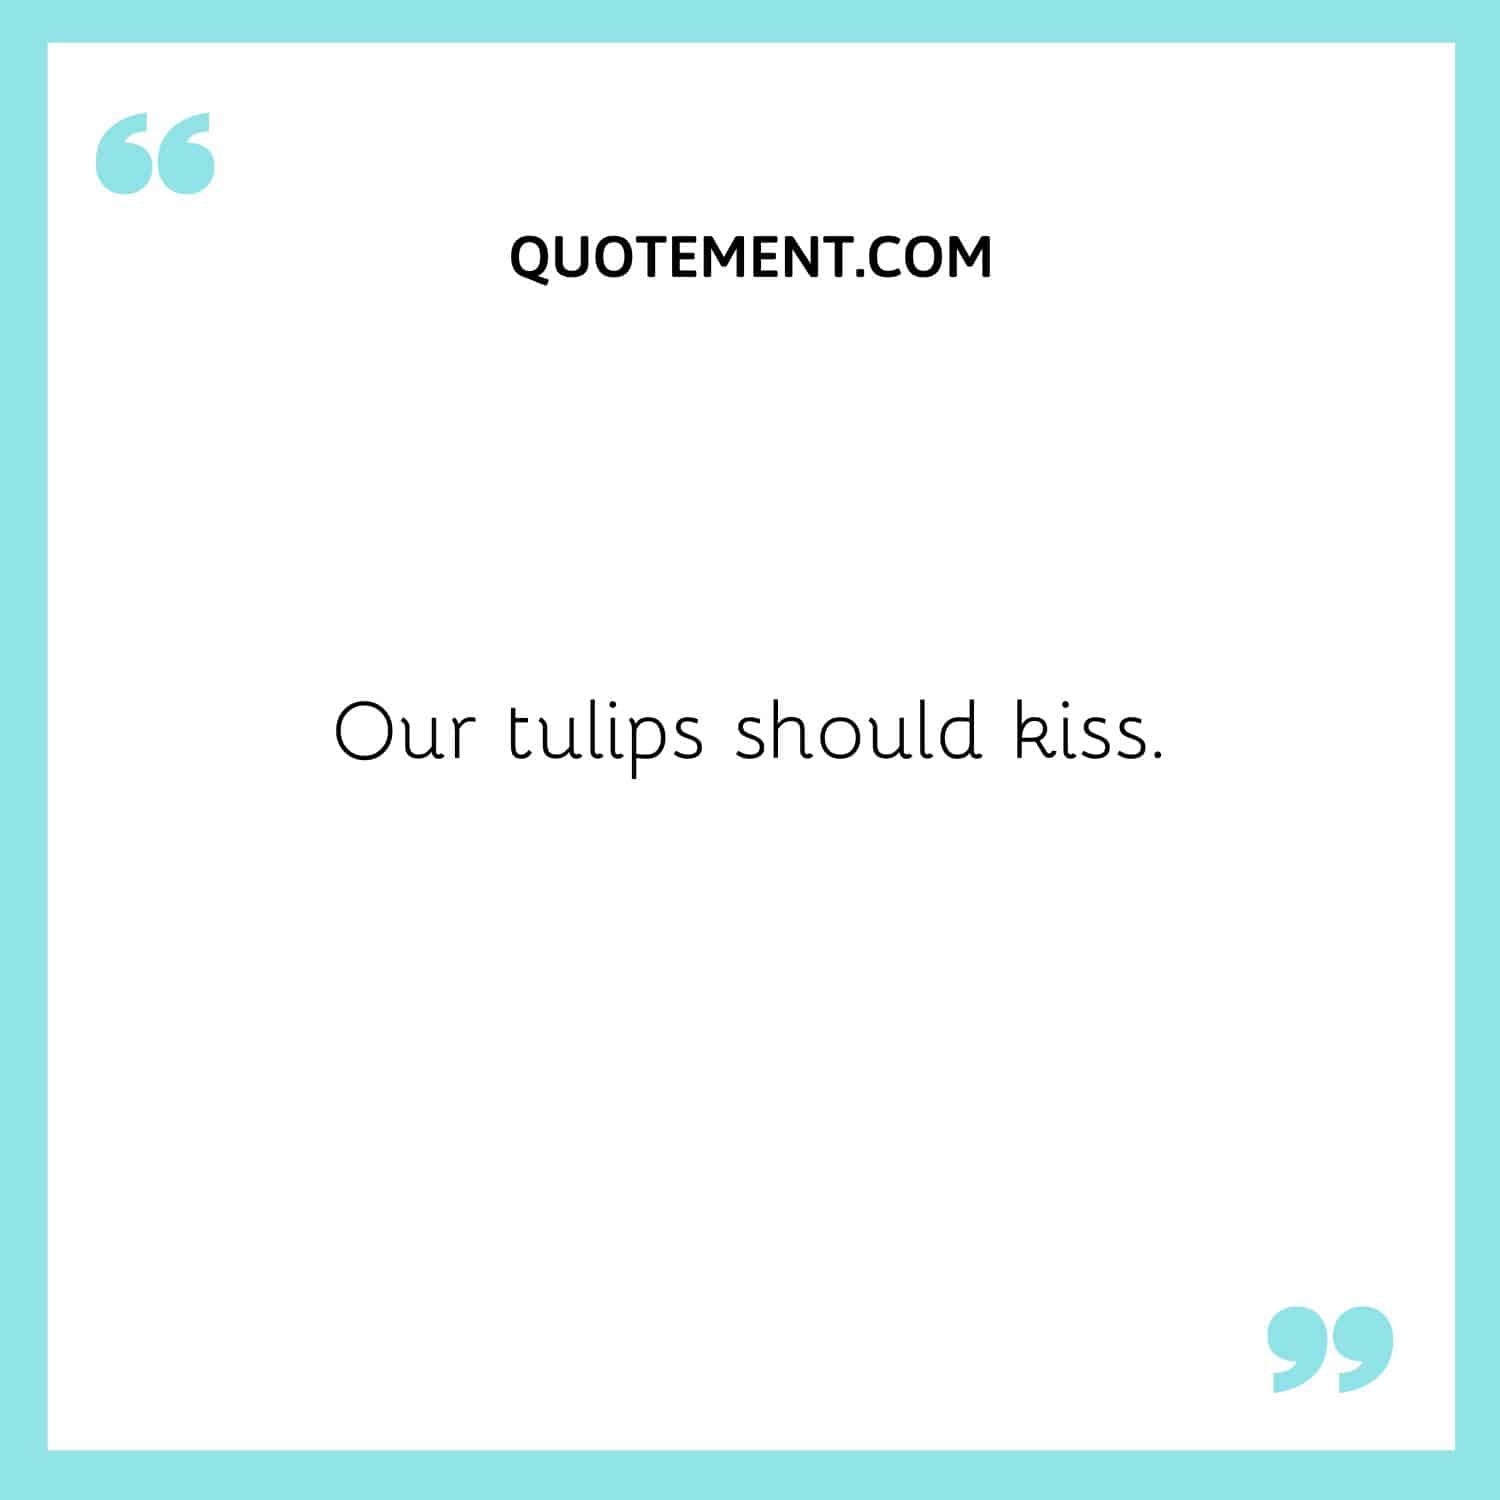 Our tulips should kiss